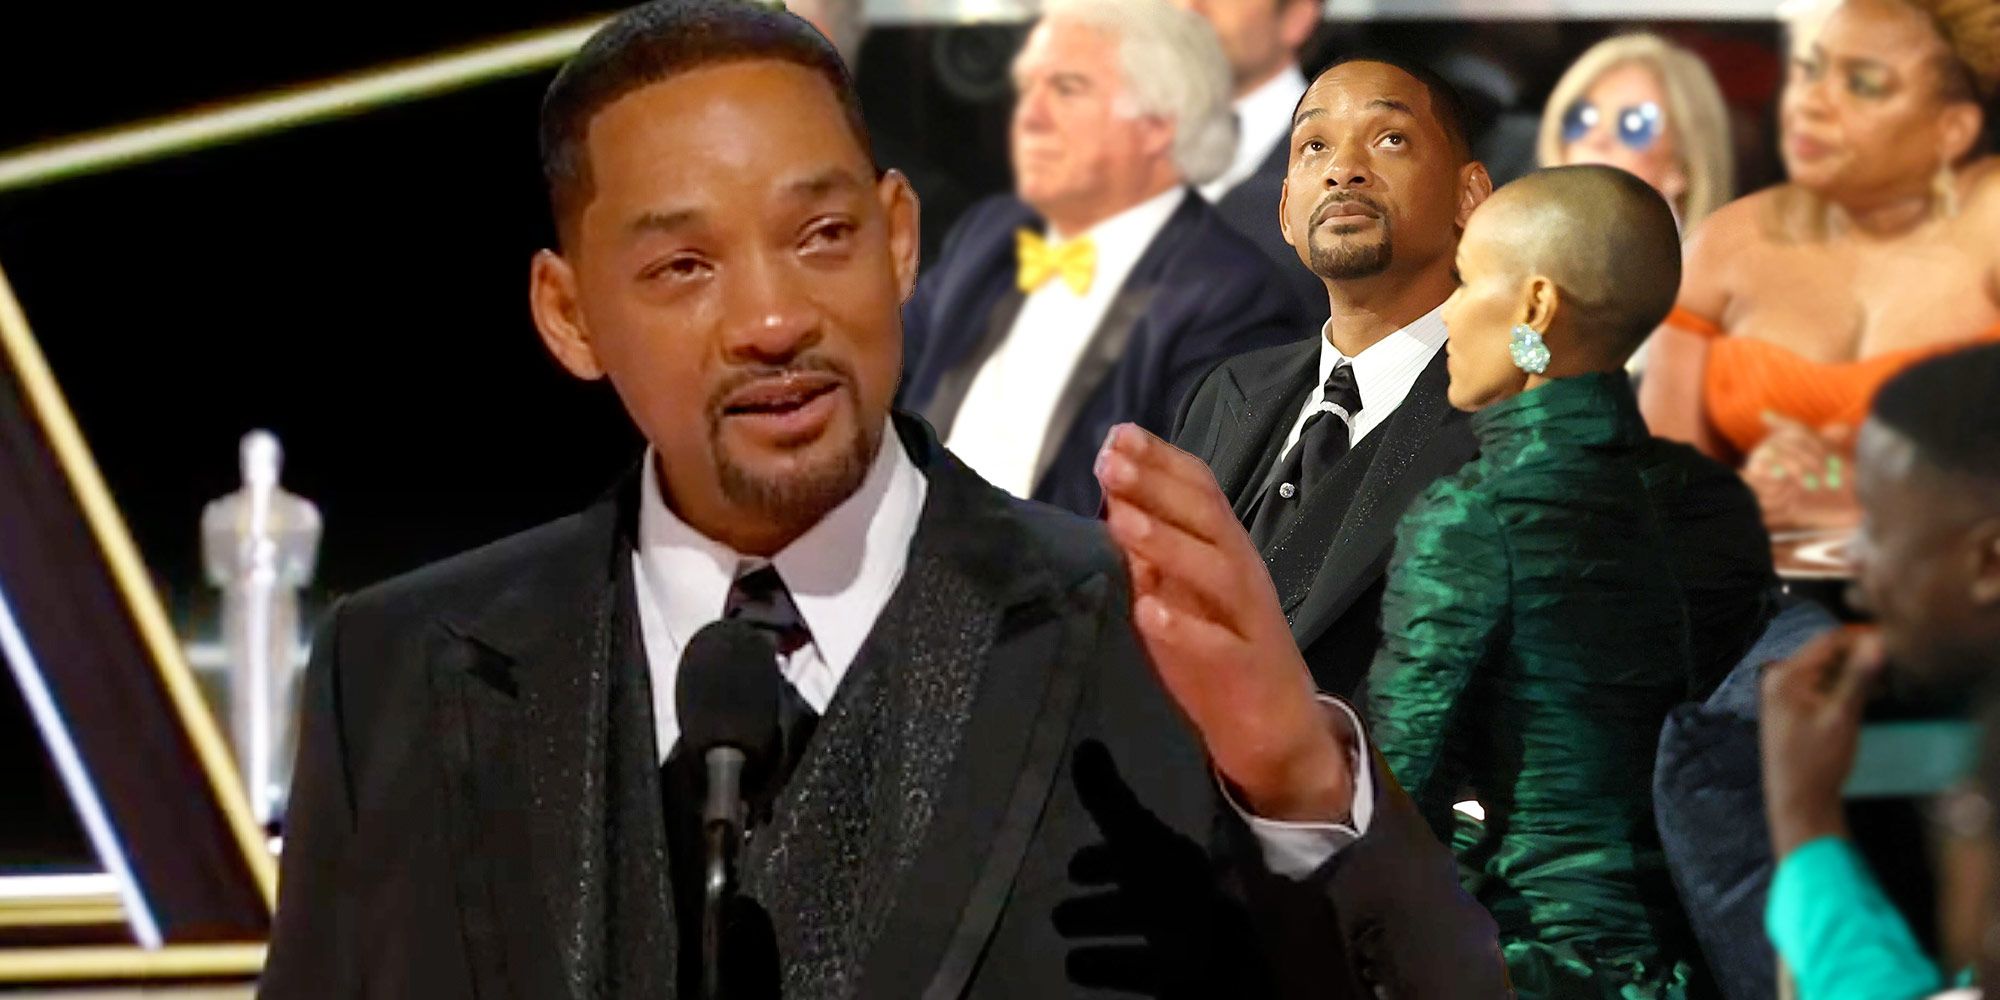 Will Smith was asked to leave the oscars after slap